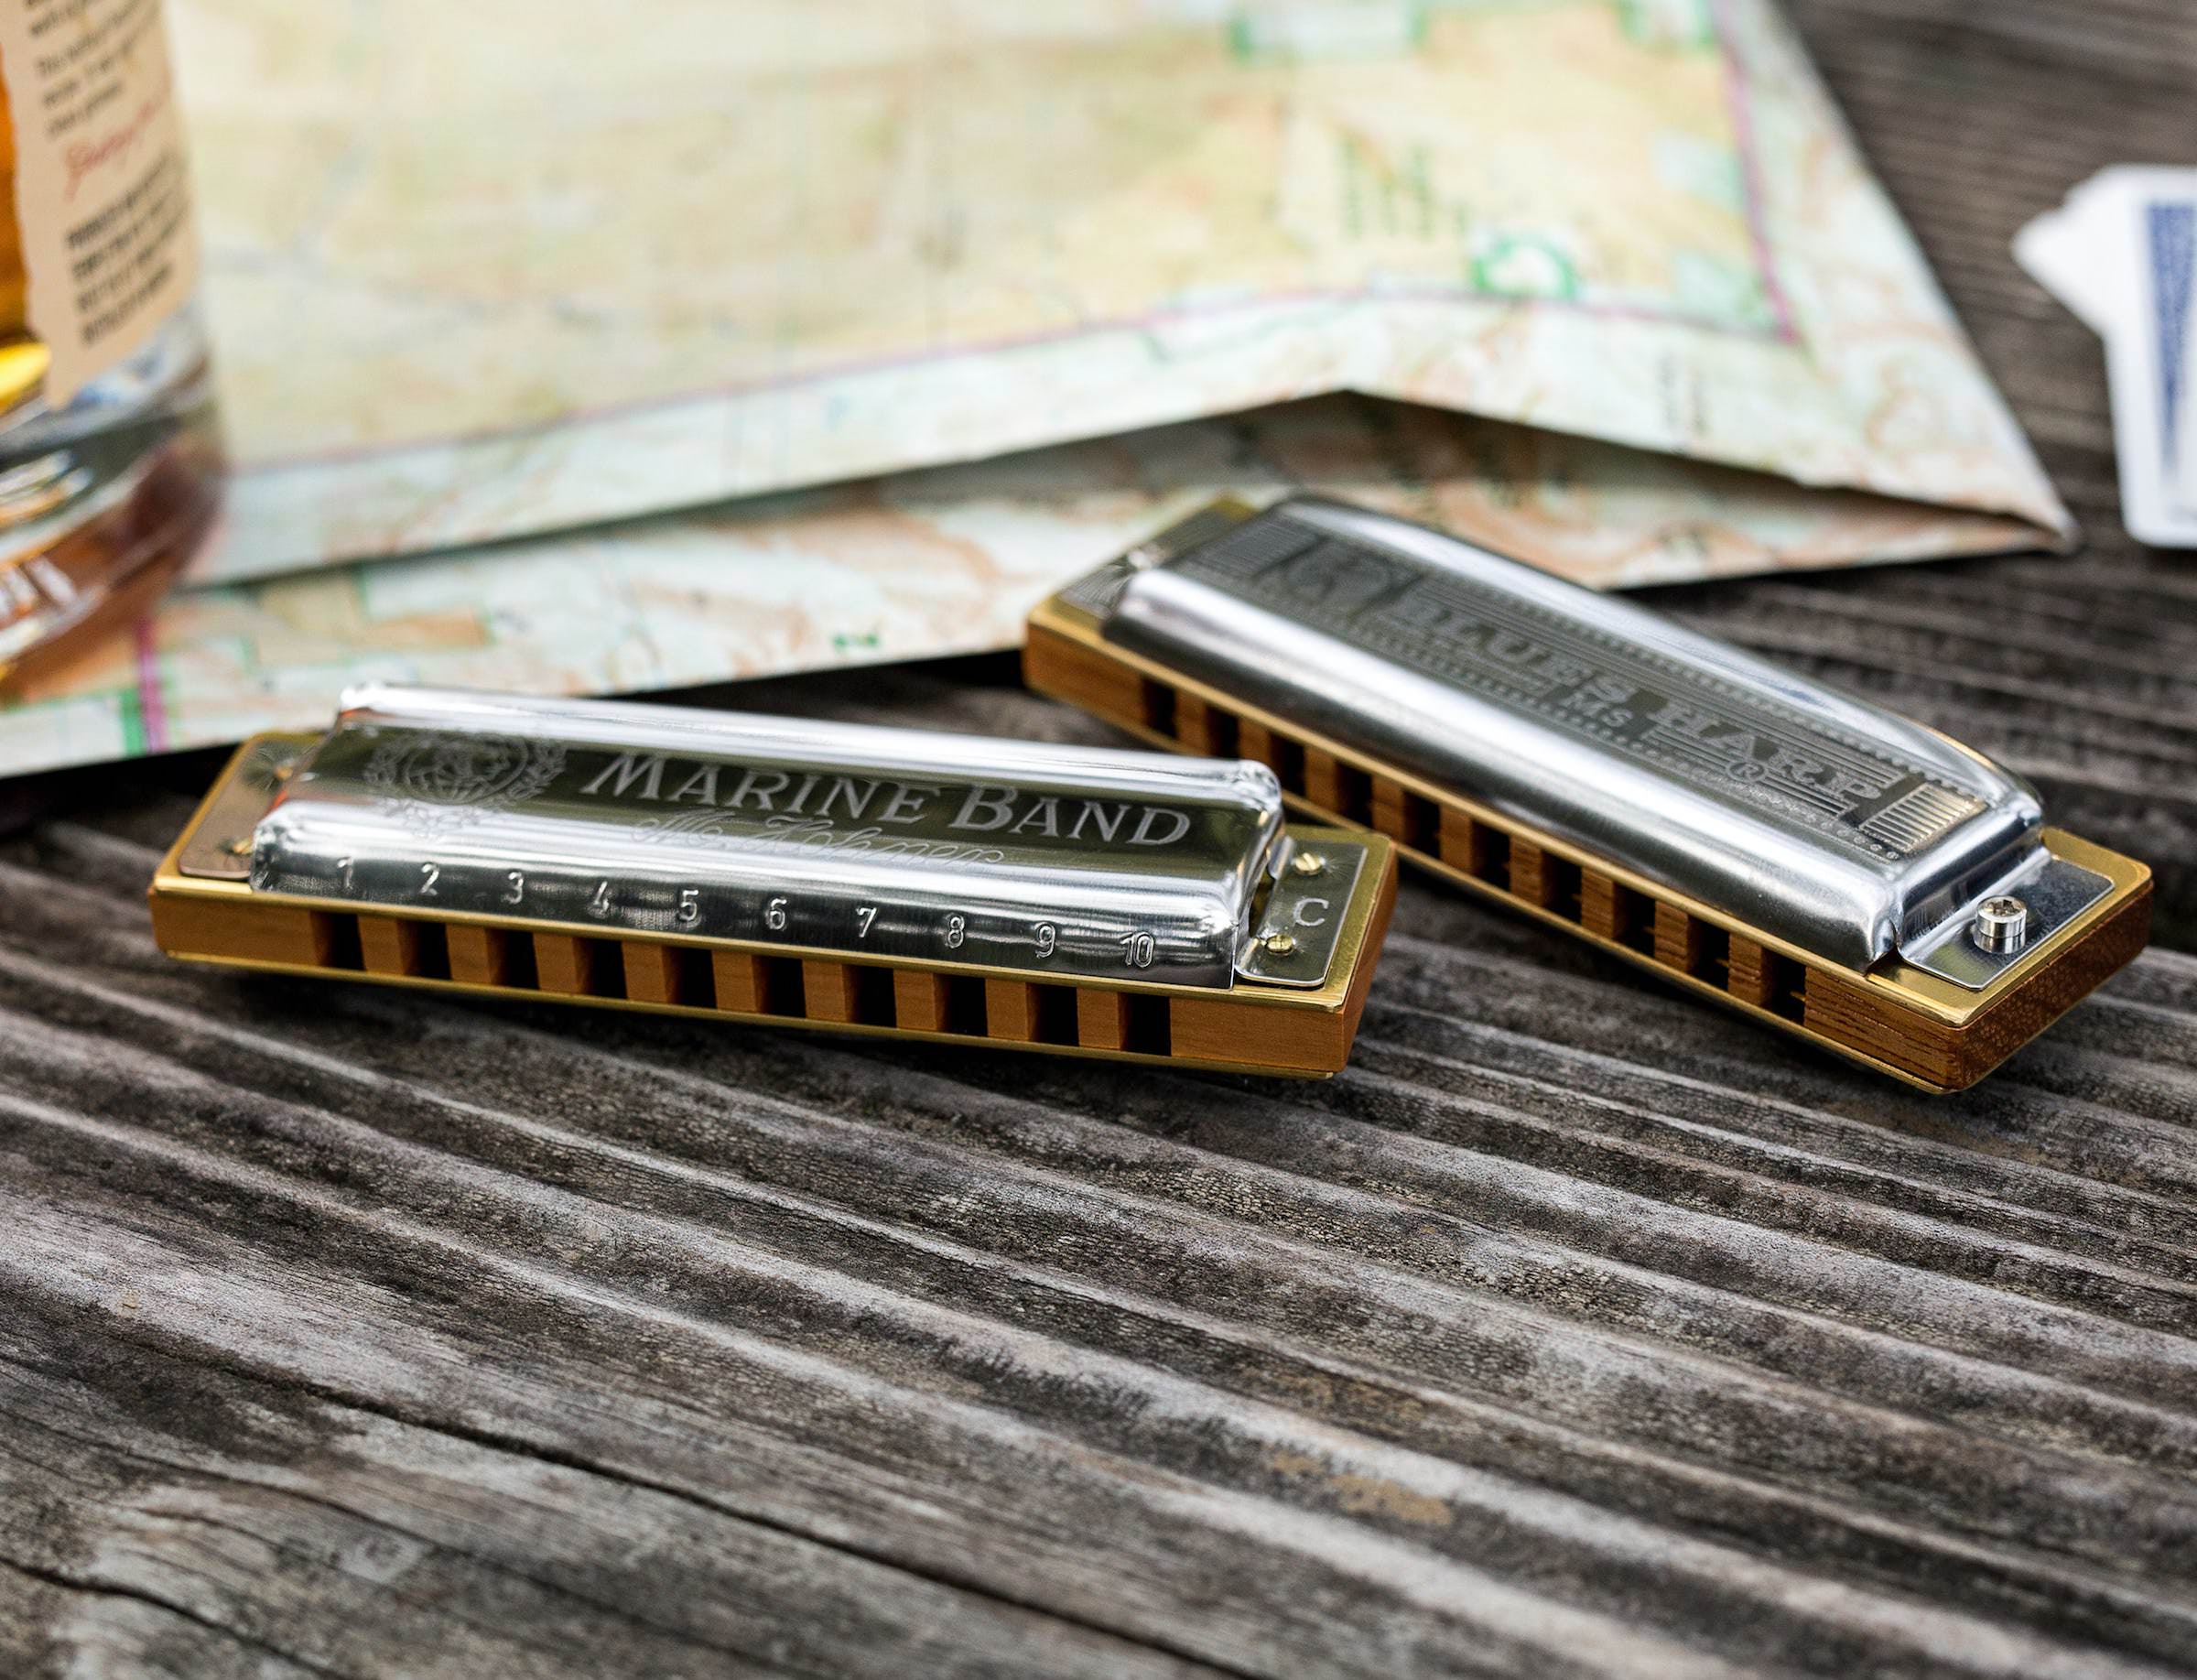 The Harmonica Used By Bob Dylan - The Hohner Marine Band - $64 USD